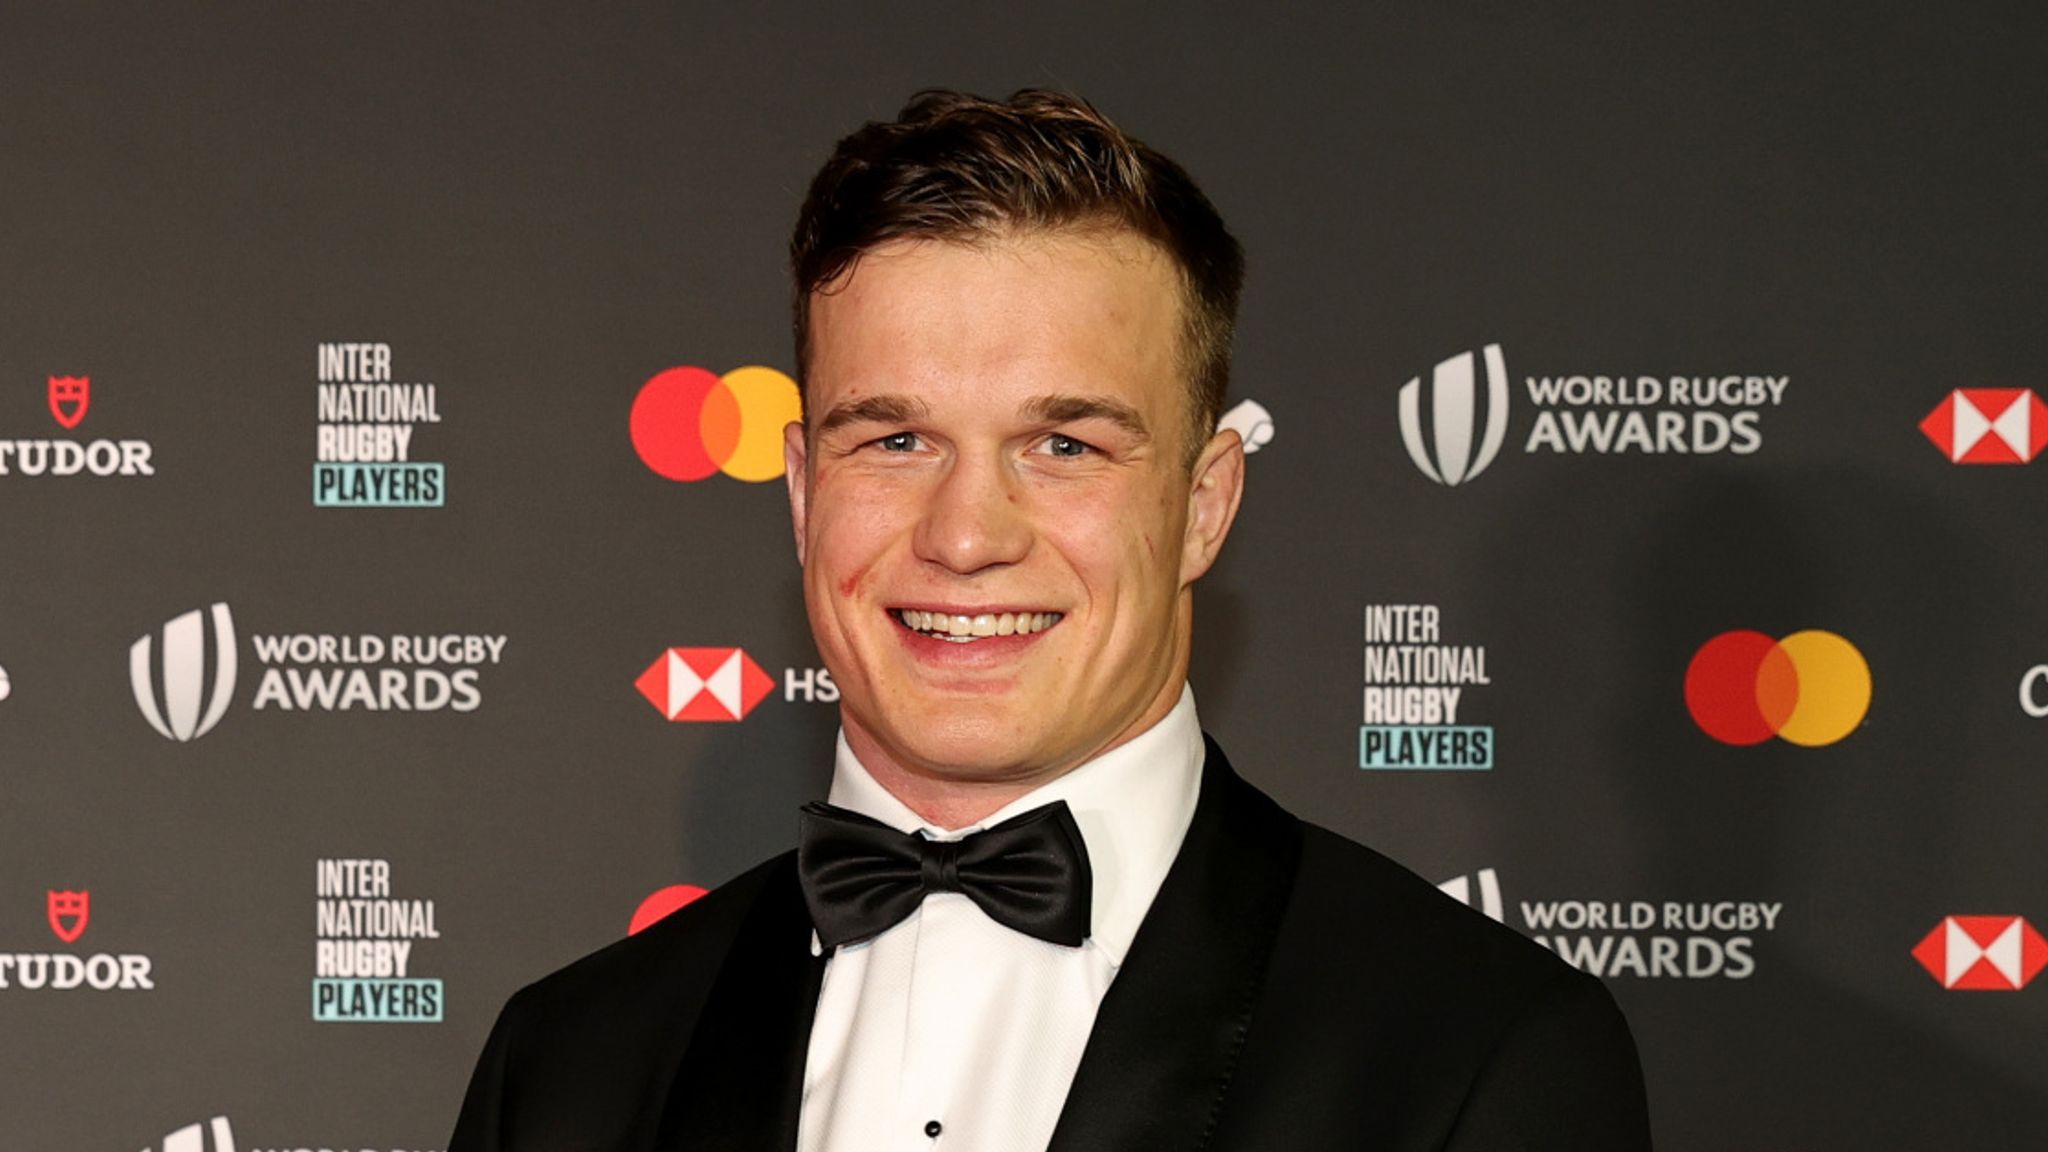 world rugby awards 2022 live stream